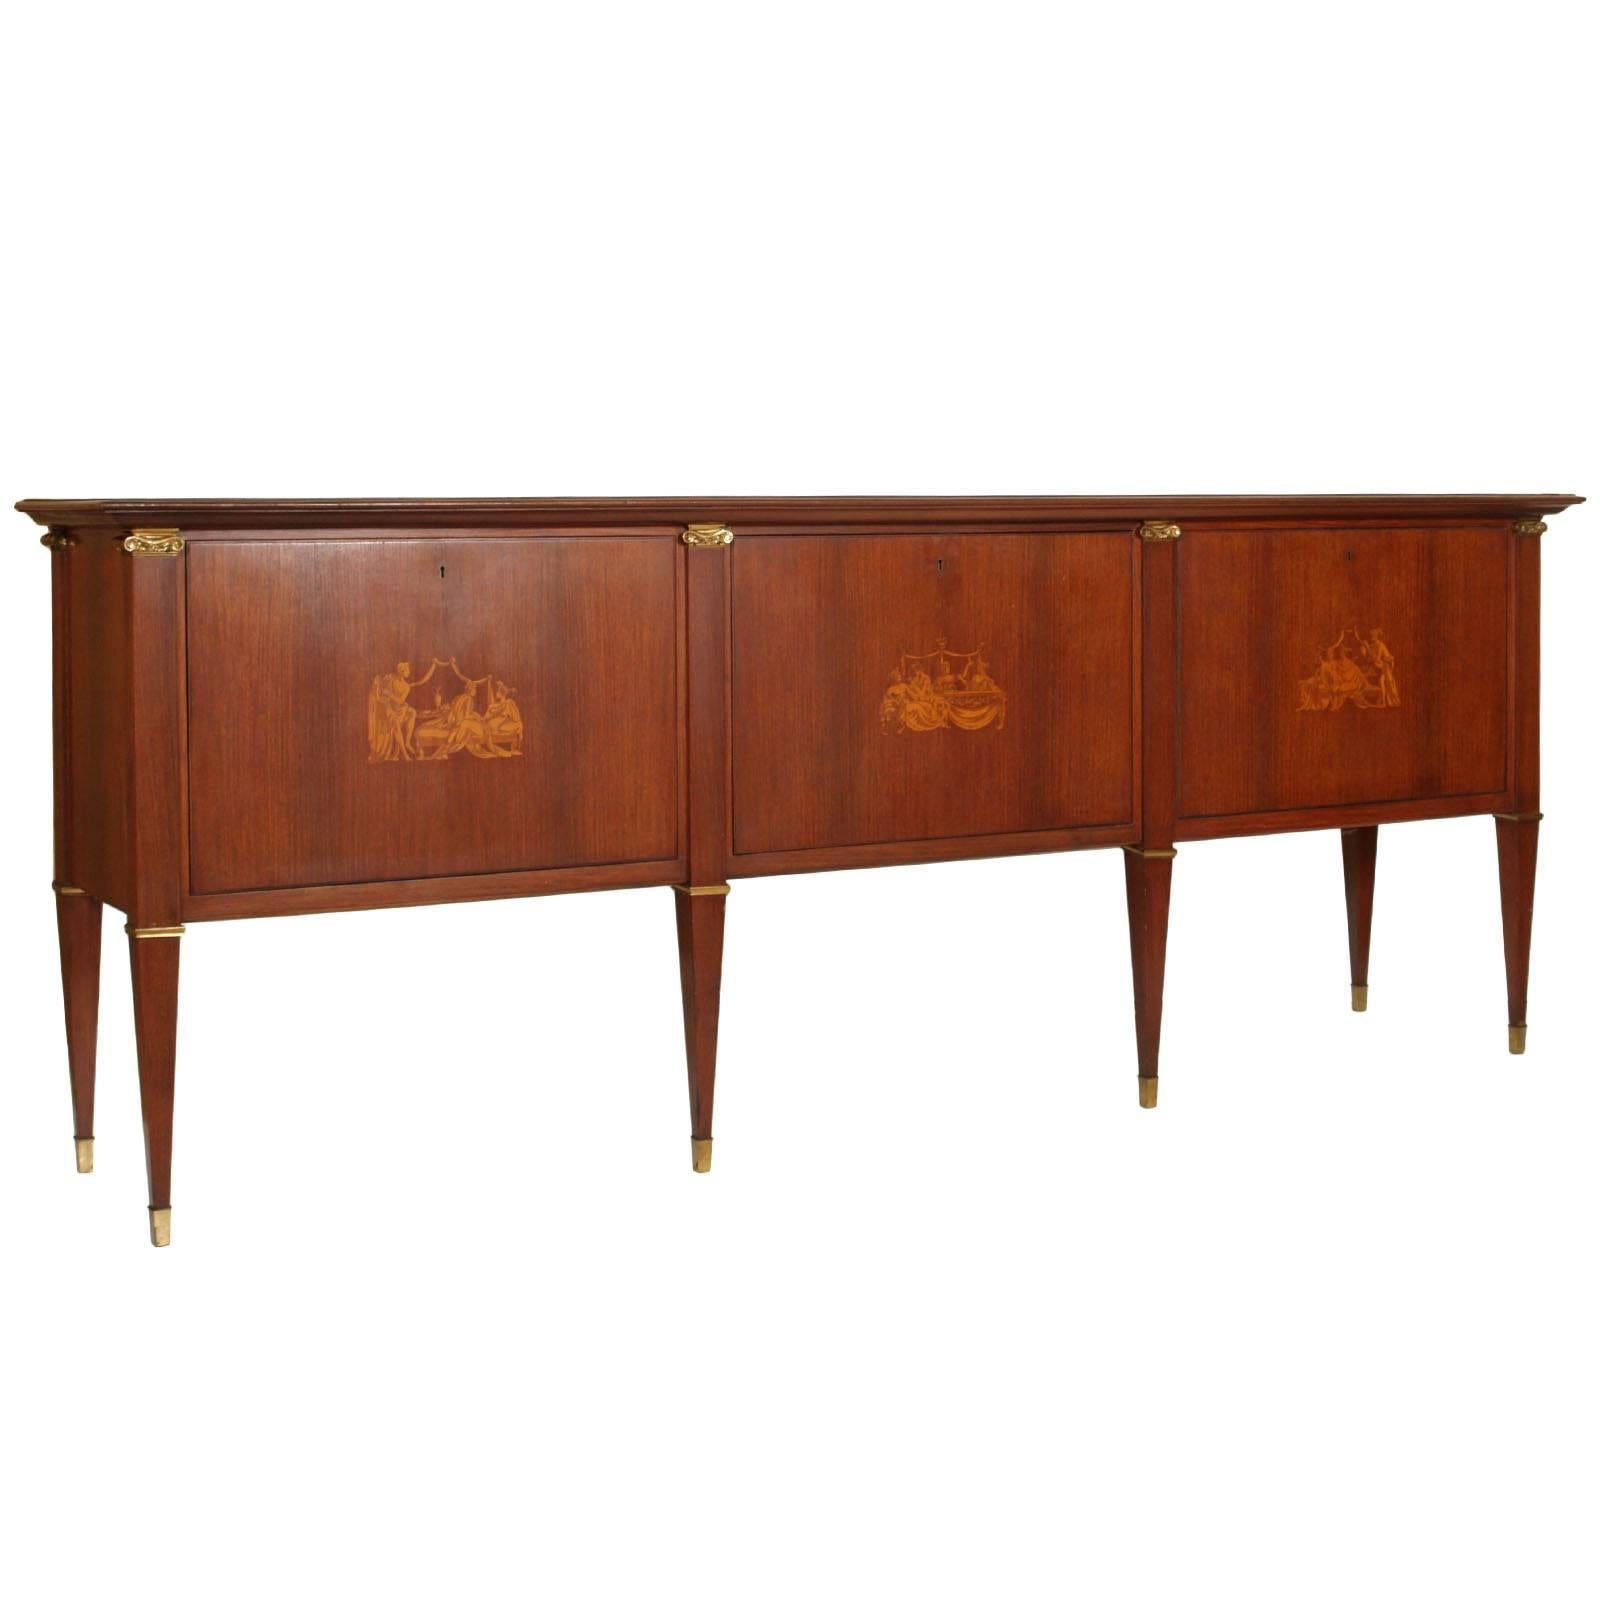 1940s Credenza Paolo Buffa attributed, in Walnut, Mobili Cantù with Maple Inlaid